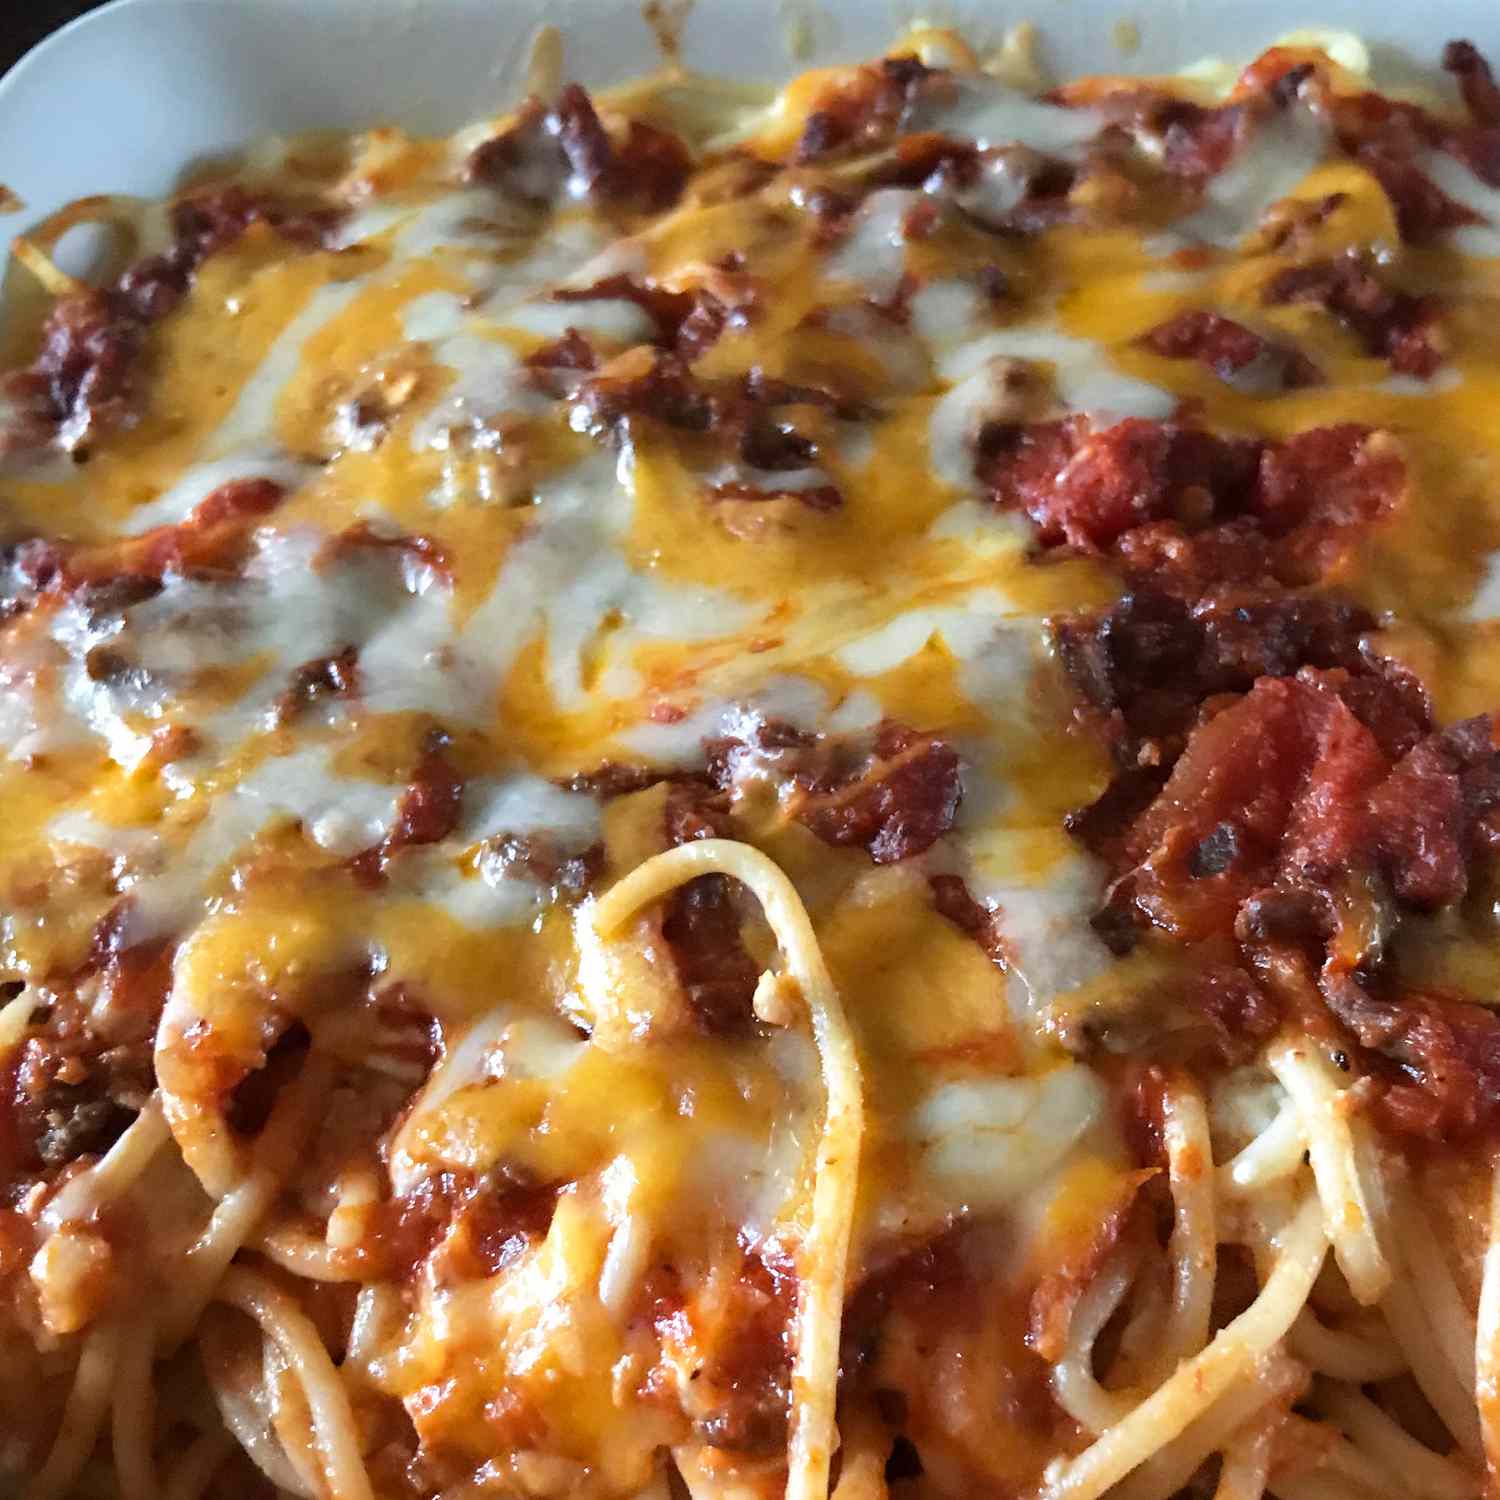 close up view of baked spaghetti with melted cheese on top